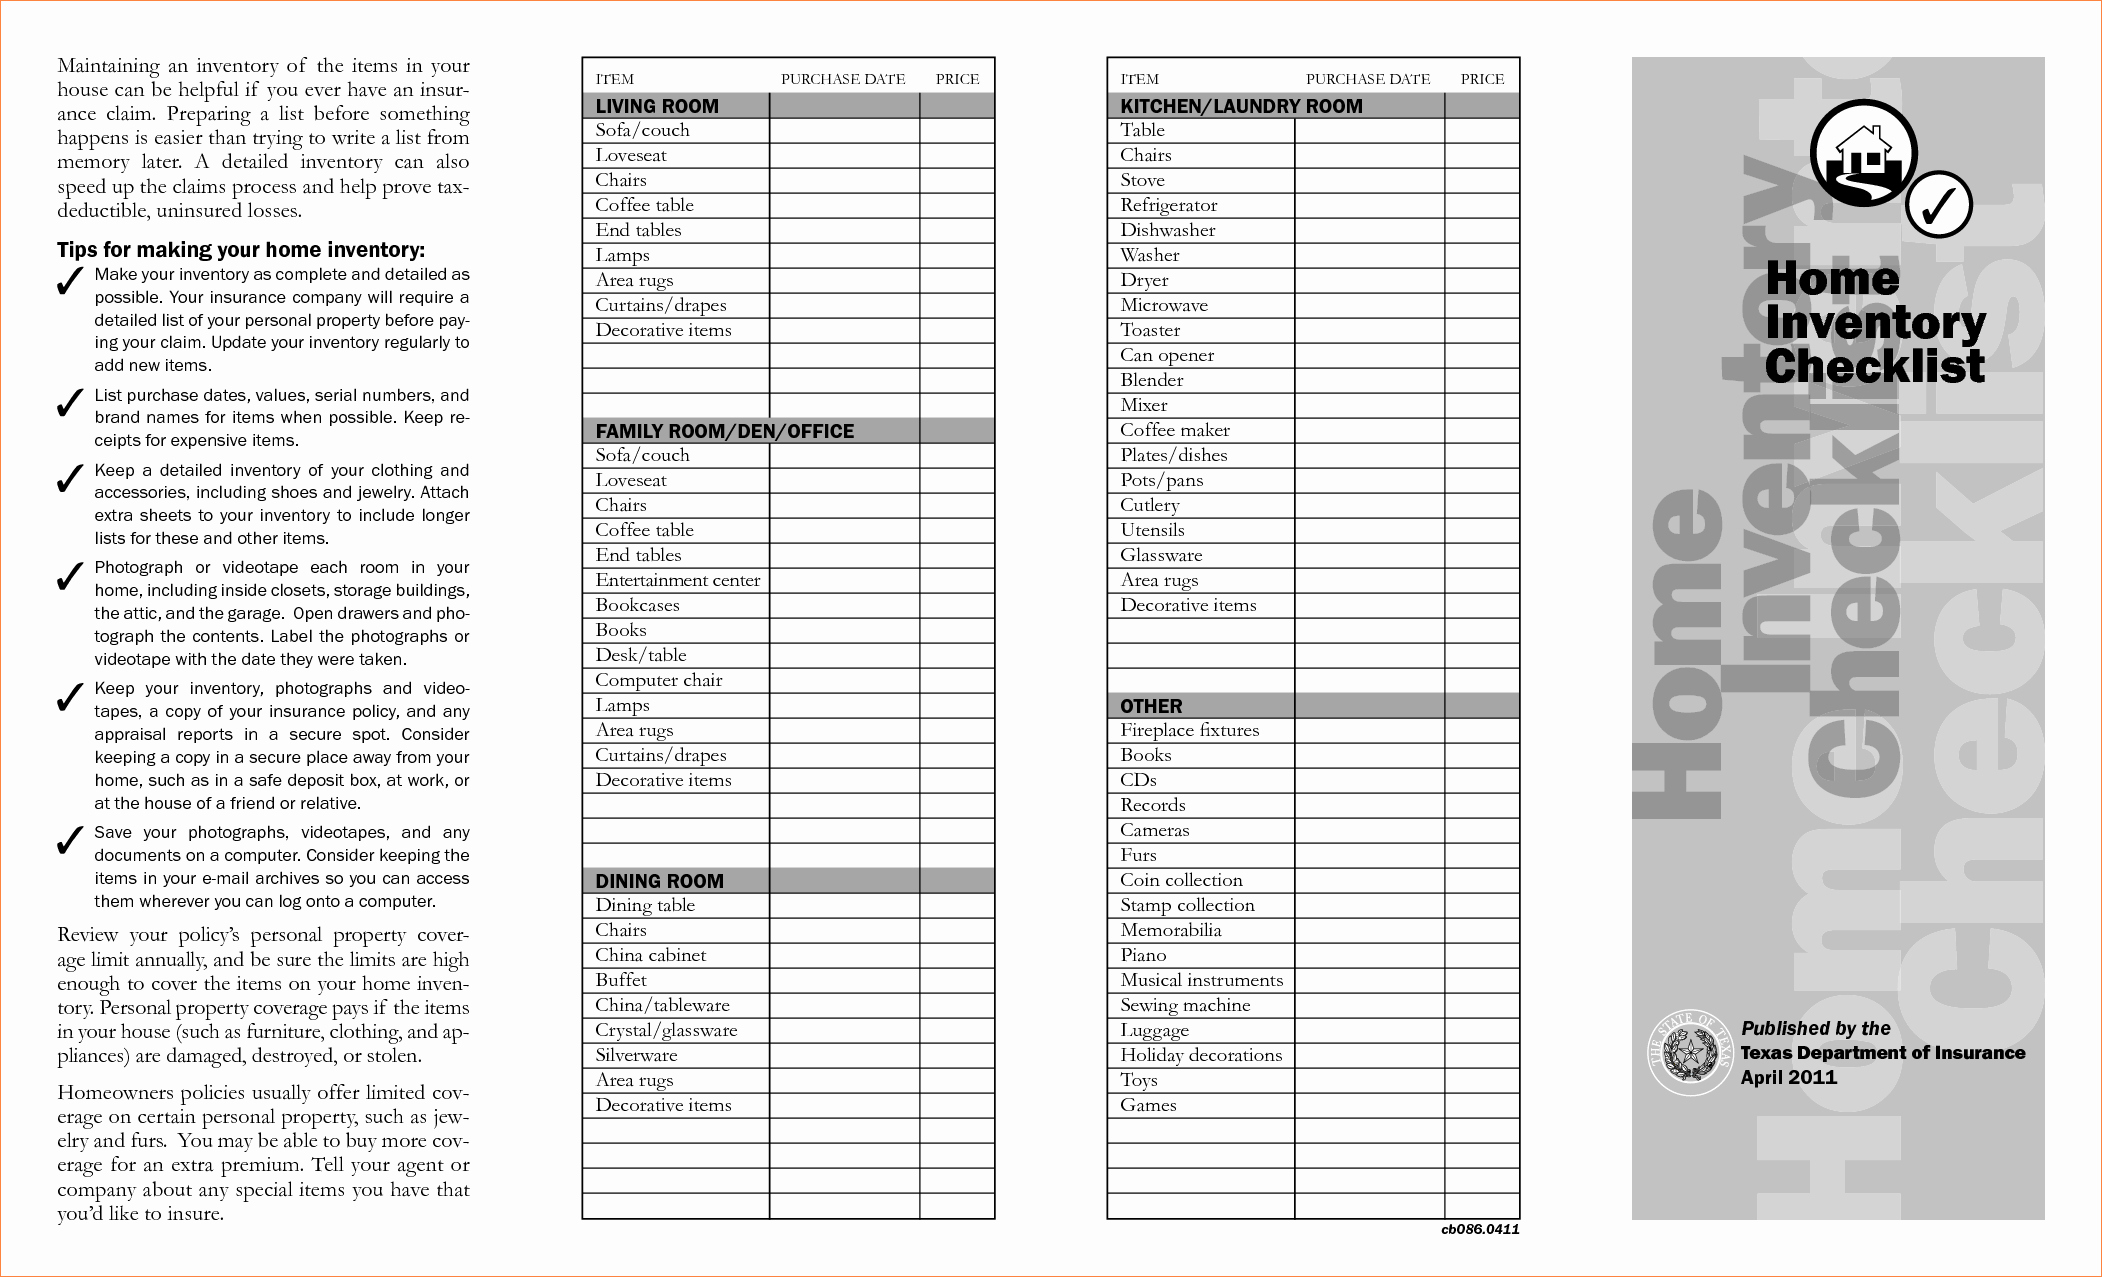 Home Contents Inventory List Template Beautiful 5 Home Inventory Checklist